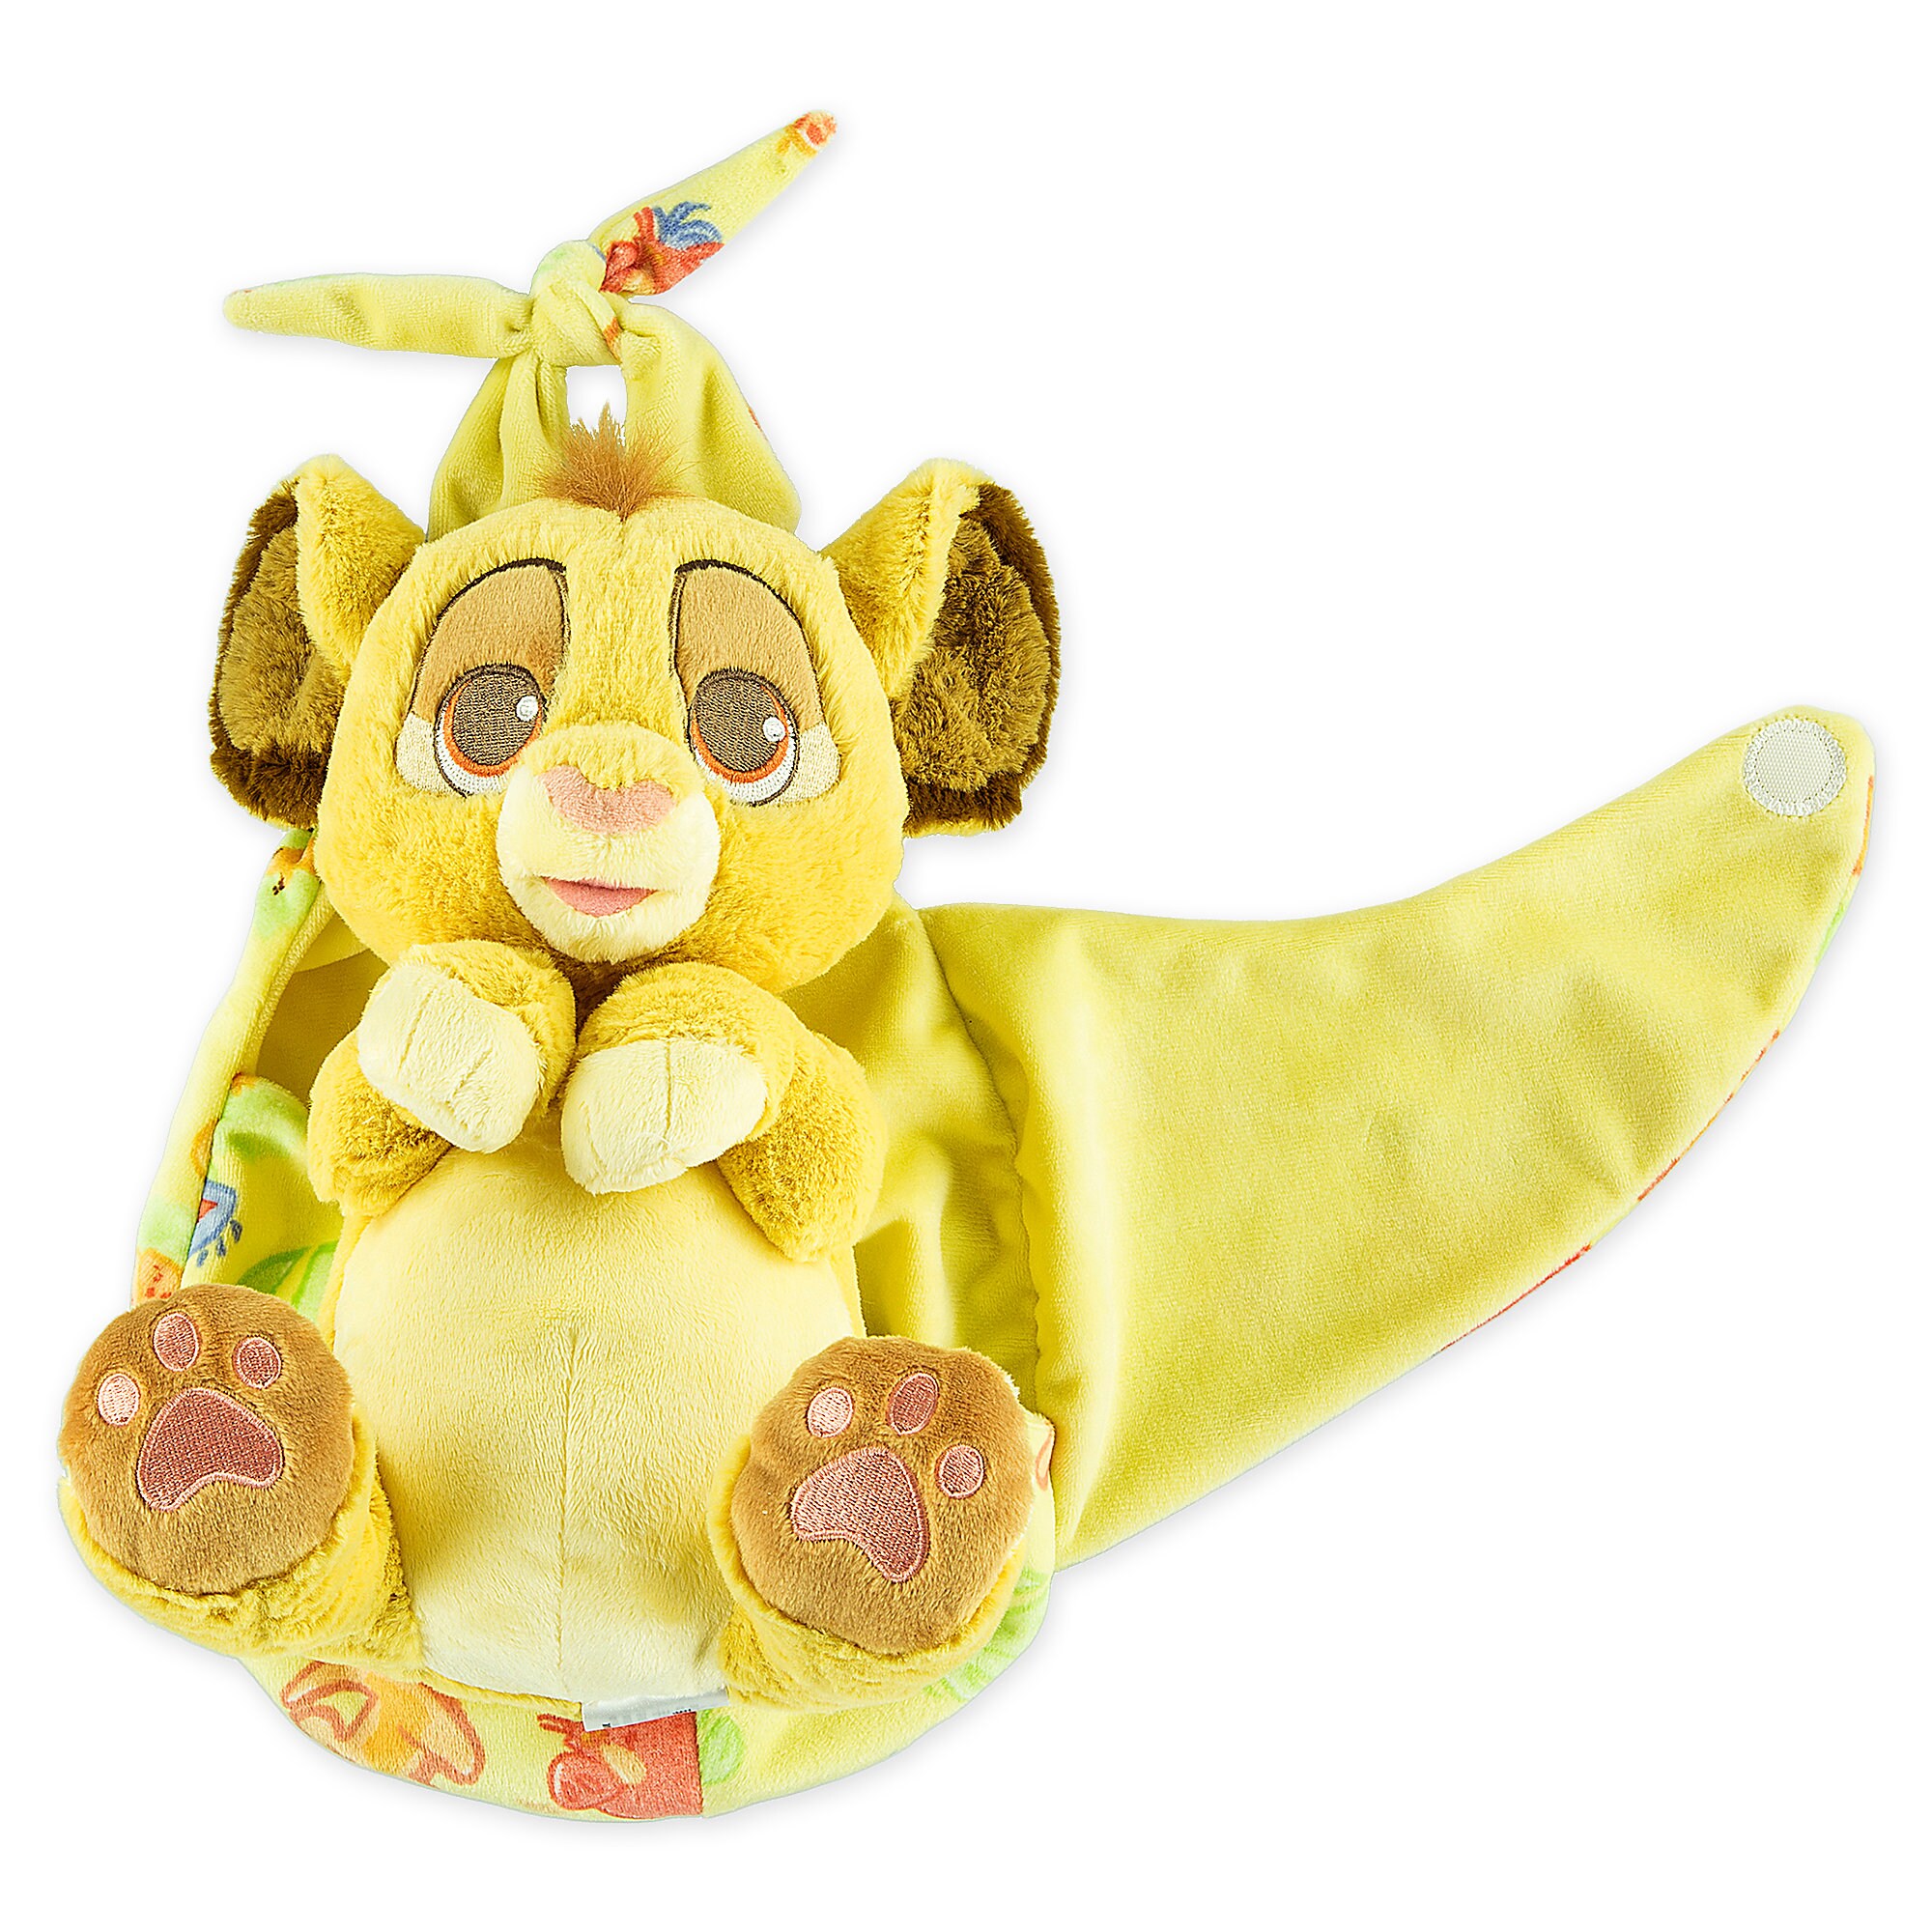 Simba Plush in Pouch - Disney Babies - Small